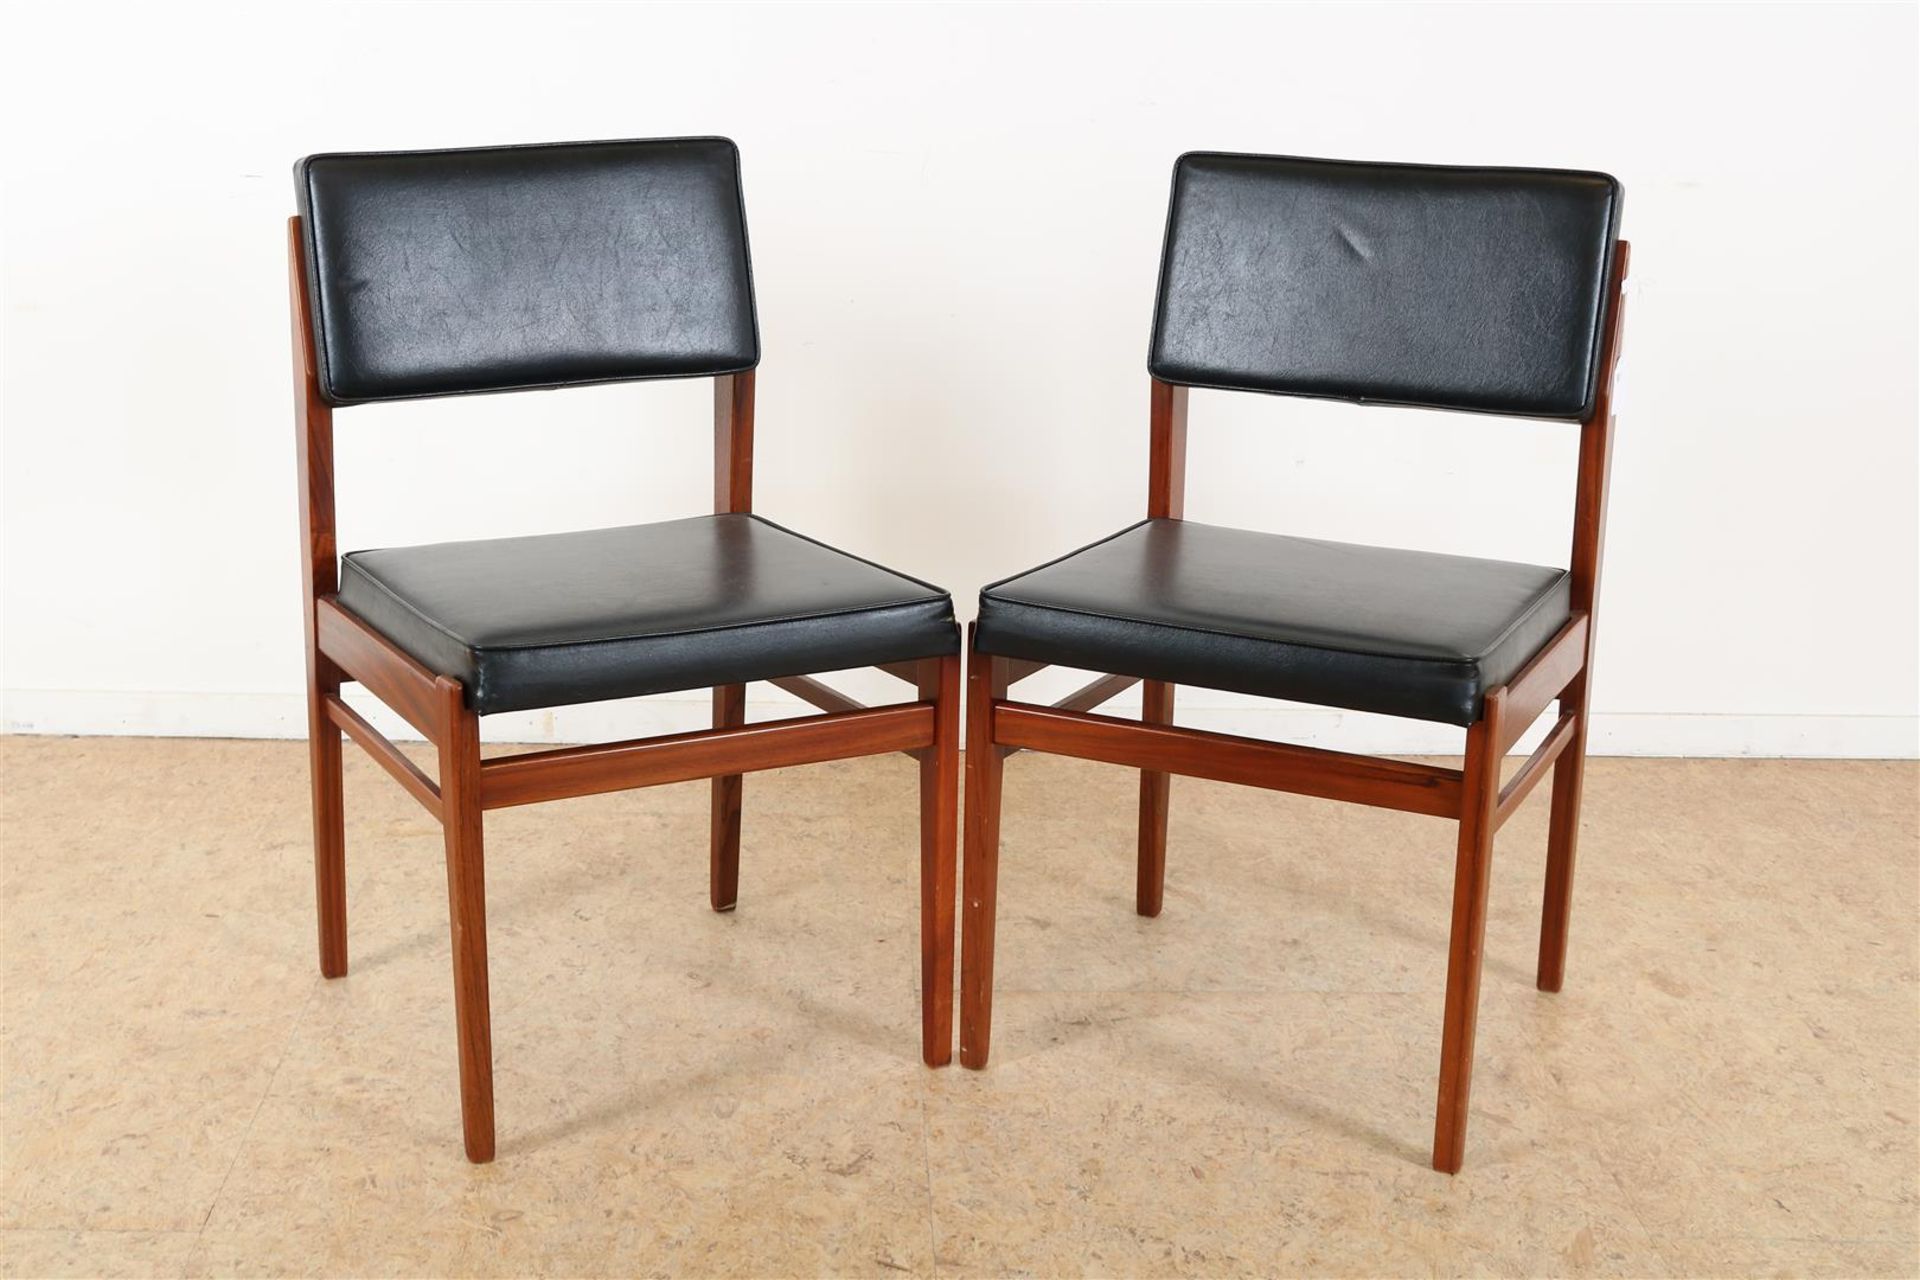 Set of teak Topform vintage chairs covered with black leatherette, 1960s. (sticker bottom)